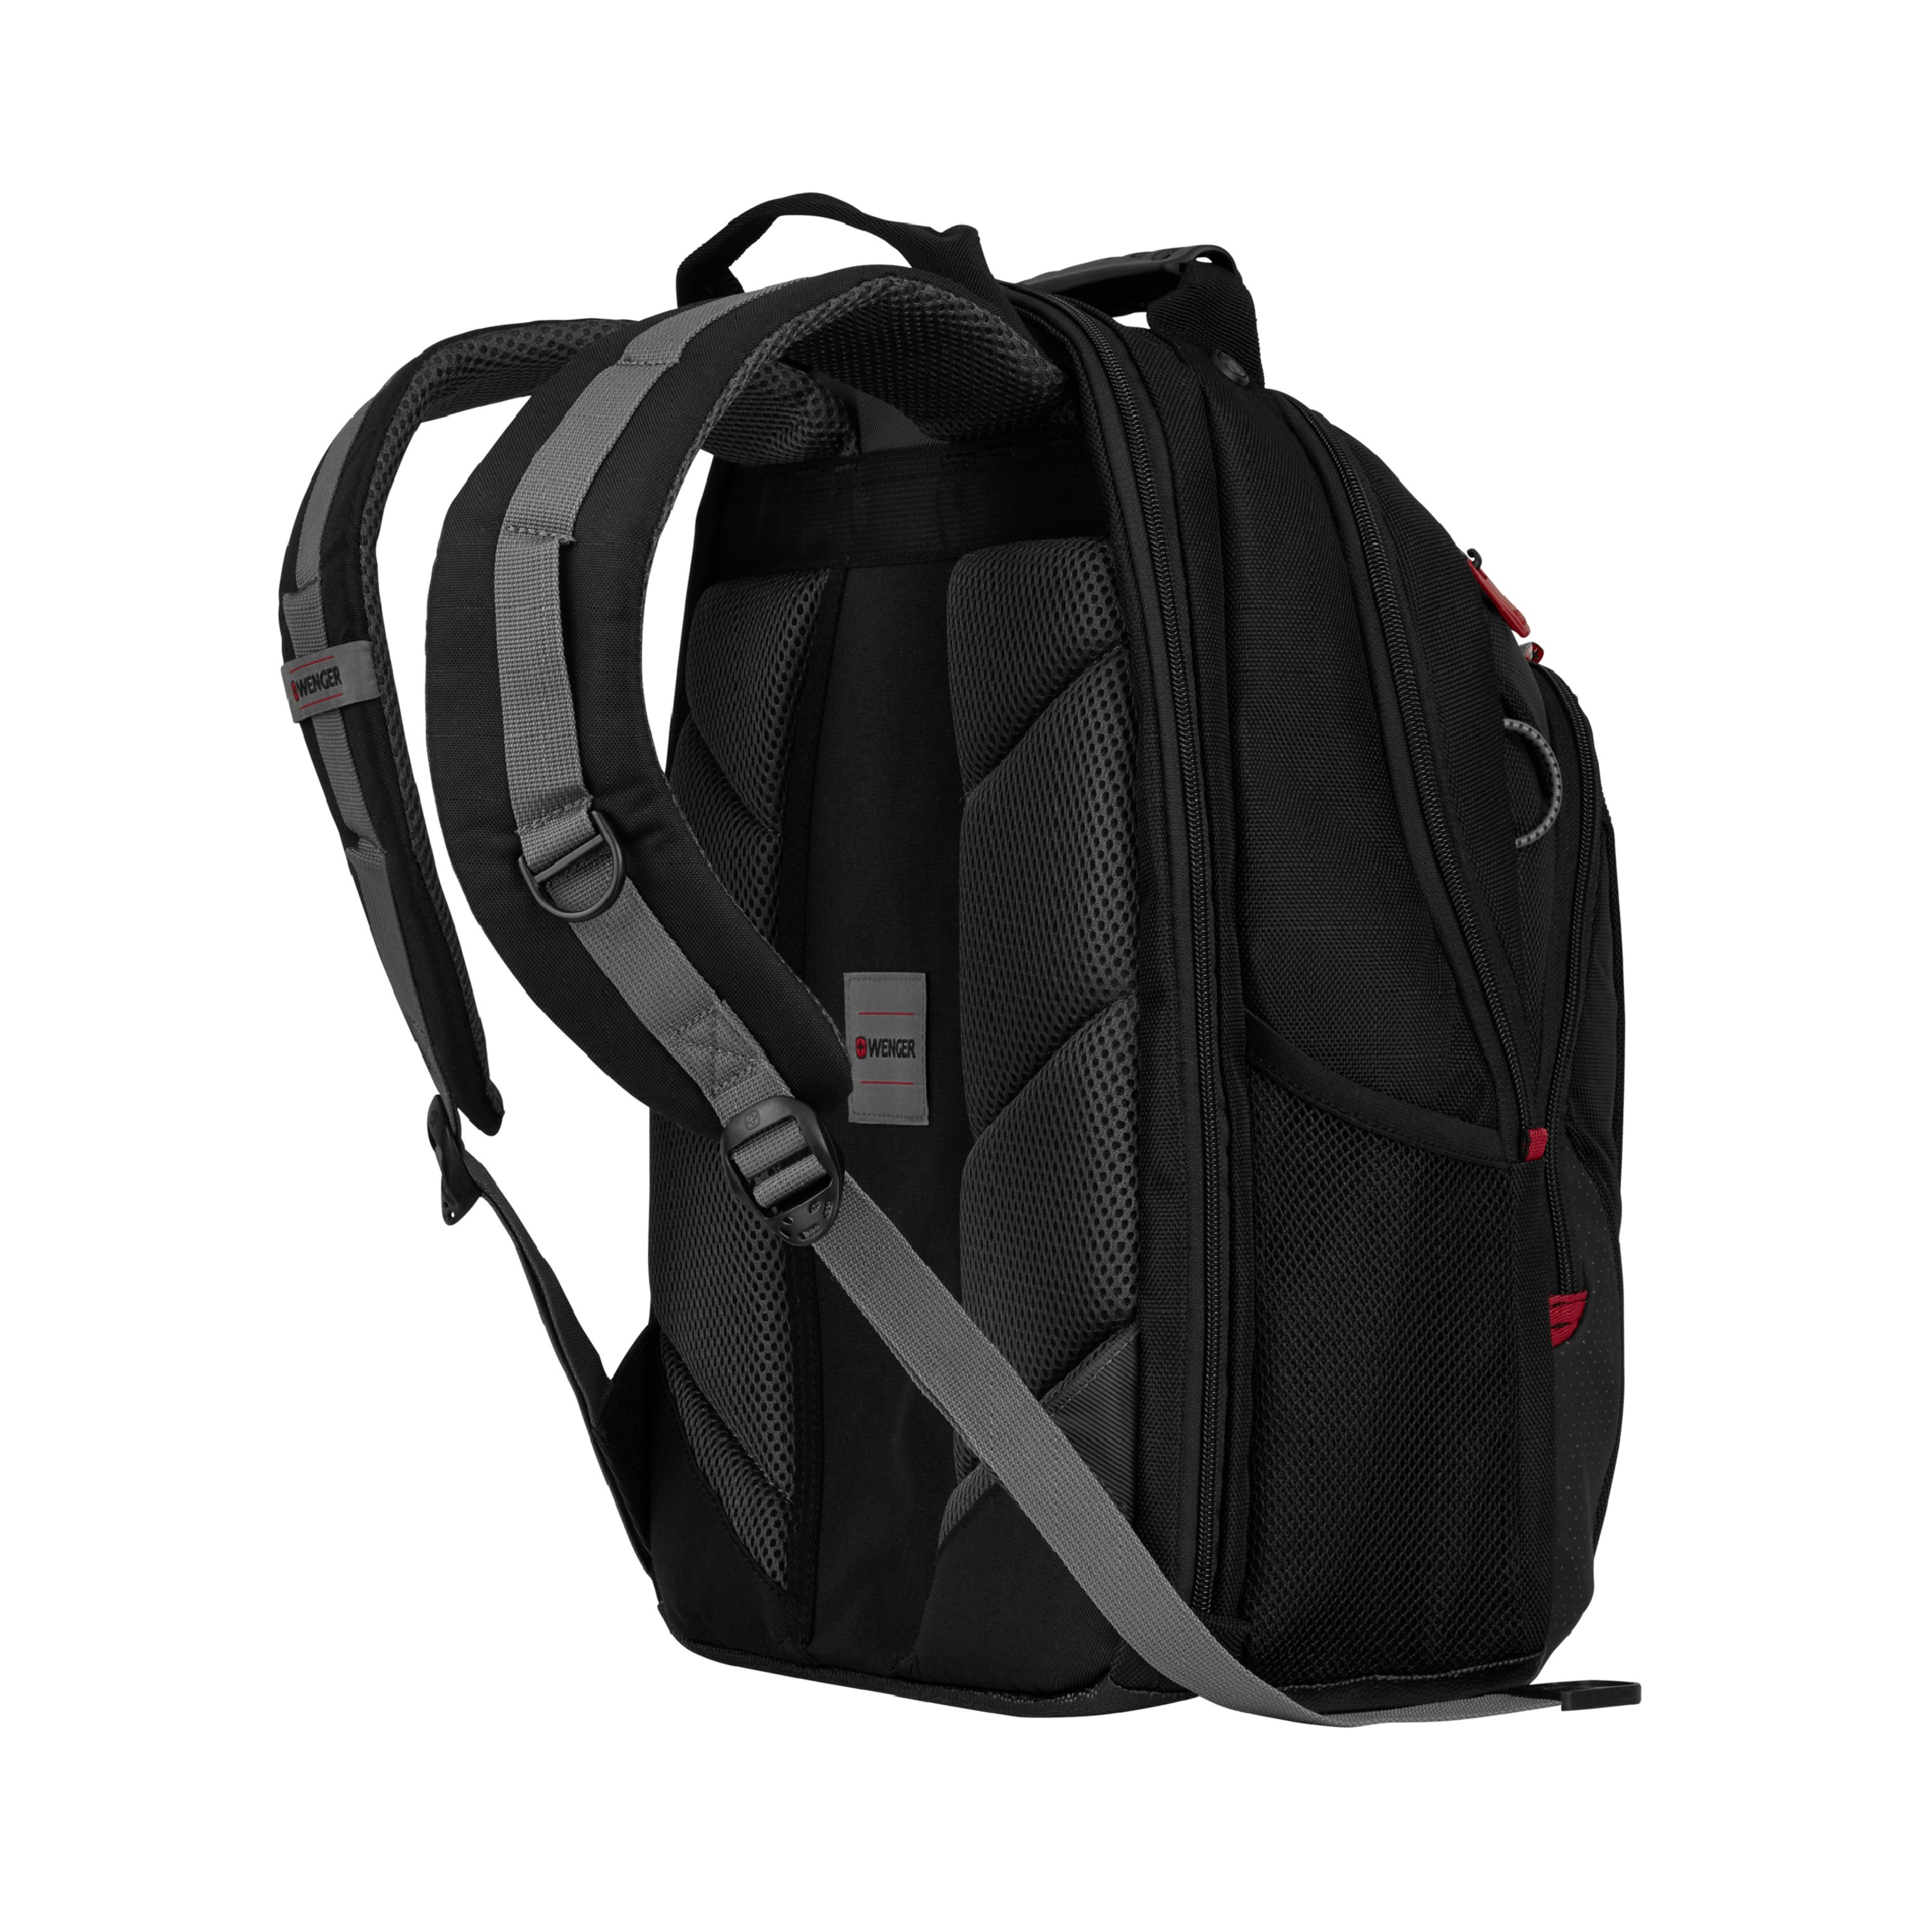 Wenger Legacy Backpack in black with grey details on straps